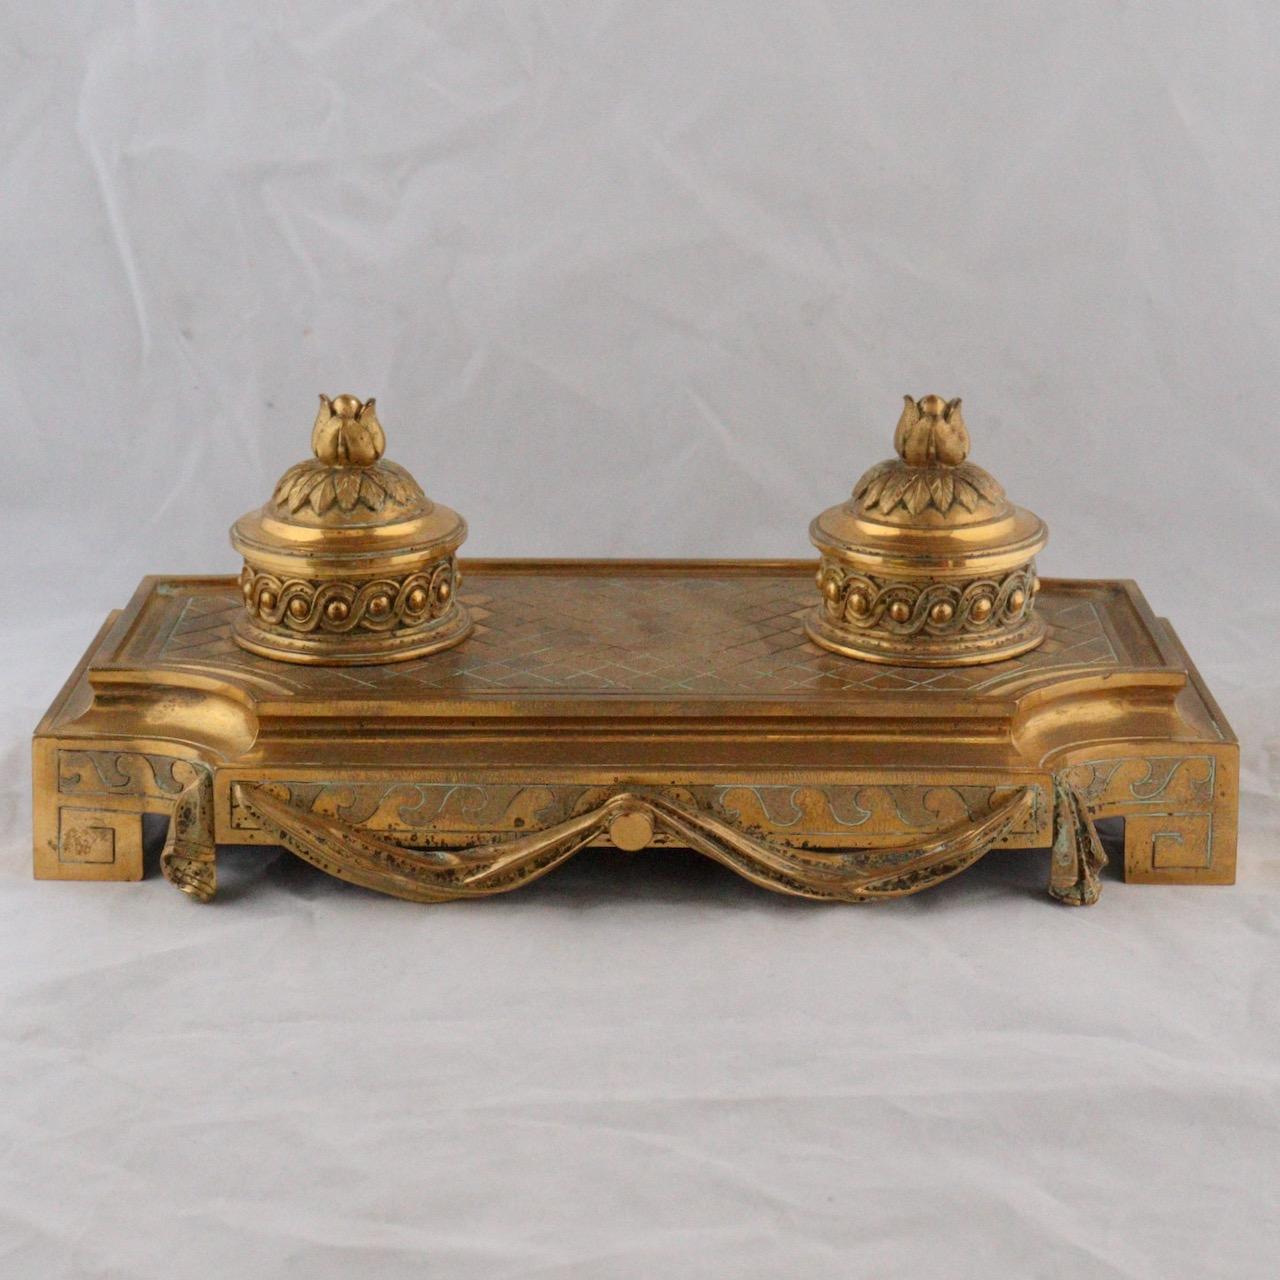 A French 19th century Louis XVI style Ormolu inkwell 
An Ormolu Double inkwell decorated with Greek-style latticework, rosettes and friezes, highlighted with drapery. The dildos decorated with piastre friezes, shaped like floral buttons and